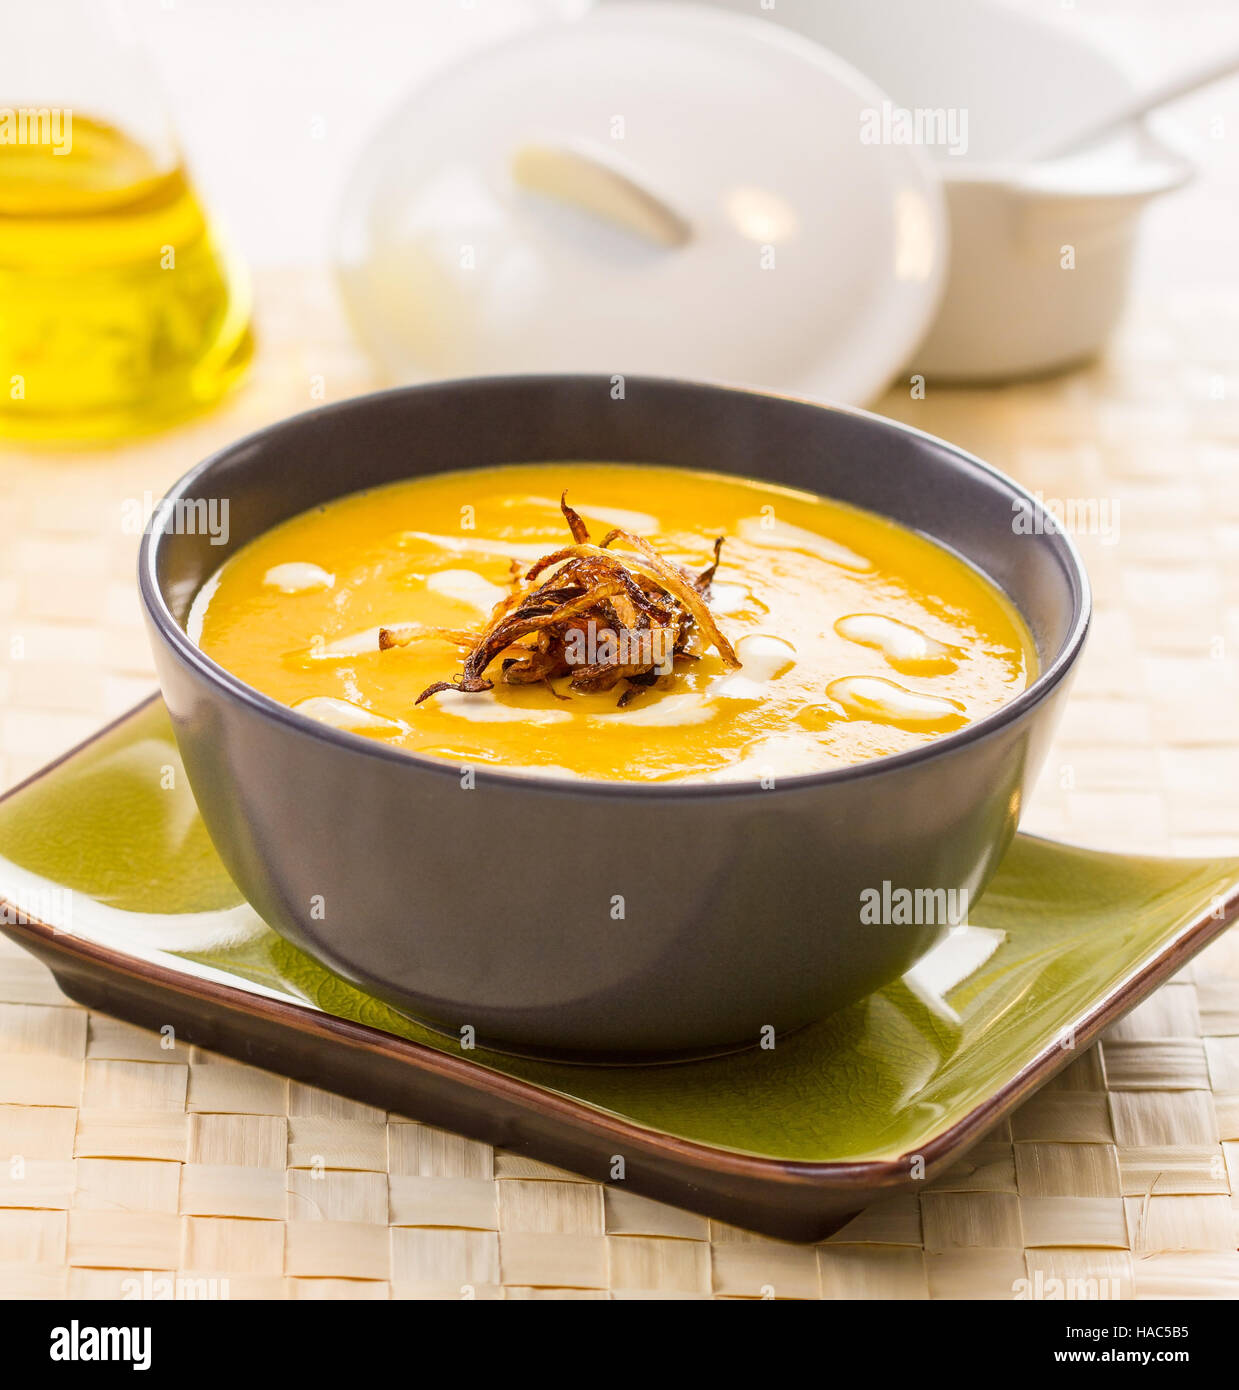 Onion cream soup garnished with caramelized onion Stock Photo